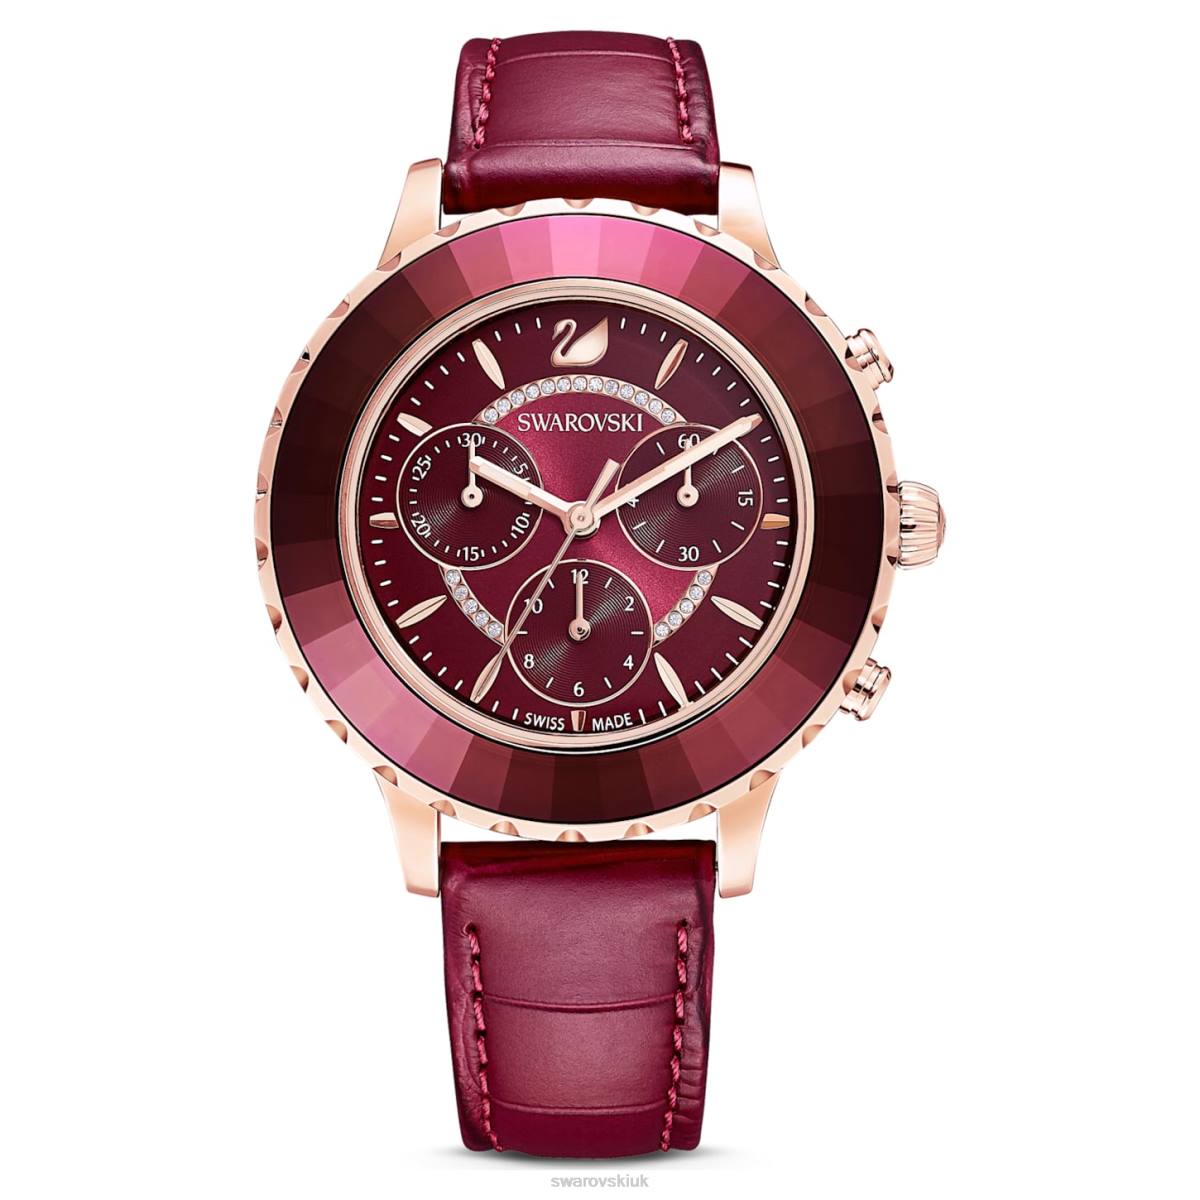 Accessories Swarovski Octea Lux Chrono watch Swiss Made, Leather strap, Red, Rose gold-tone finish 48JX1195